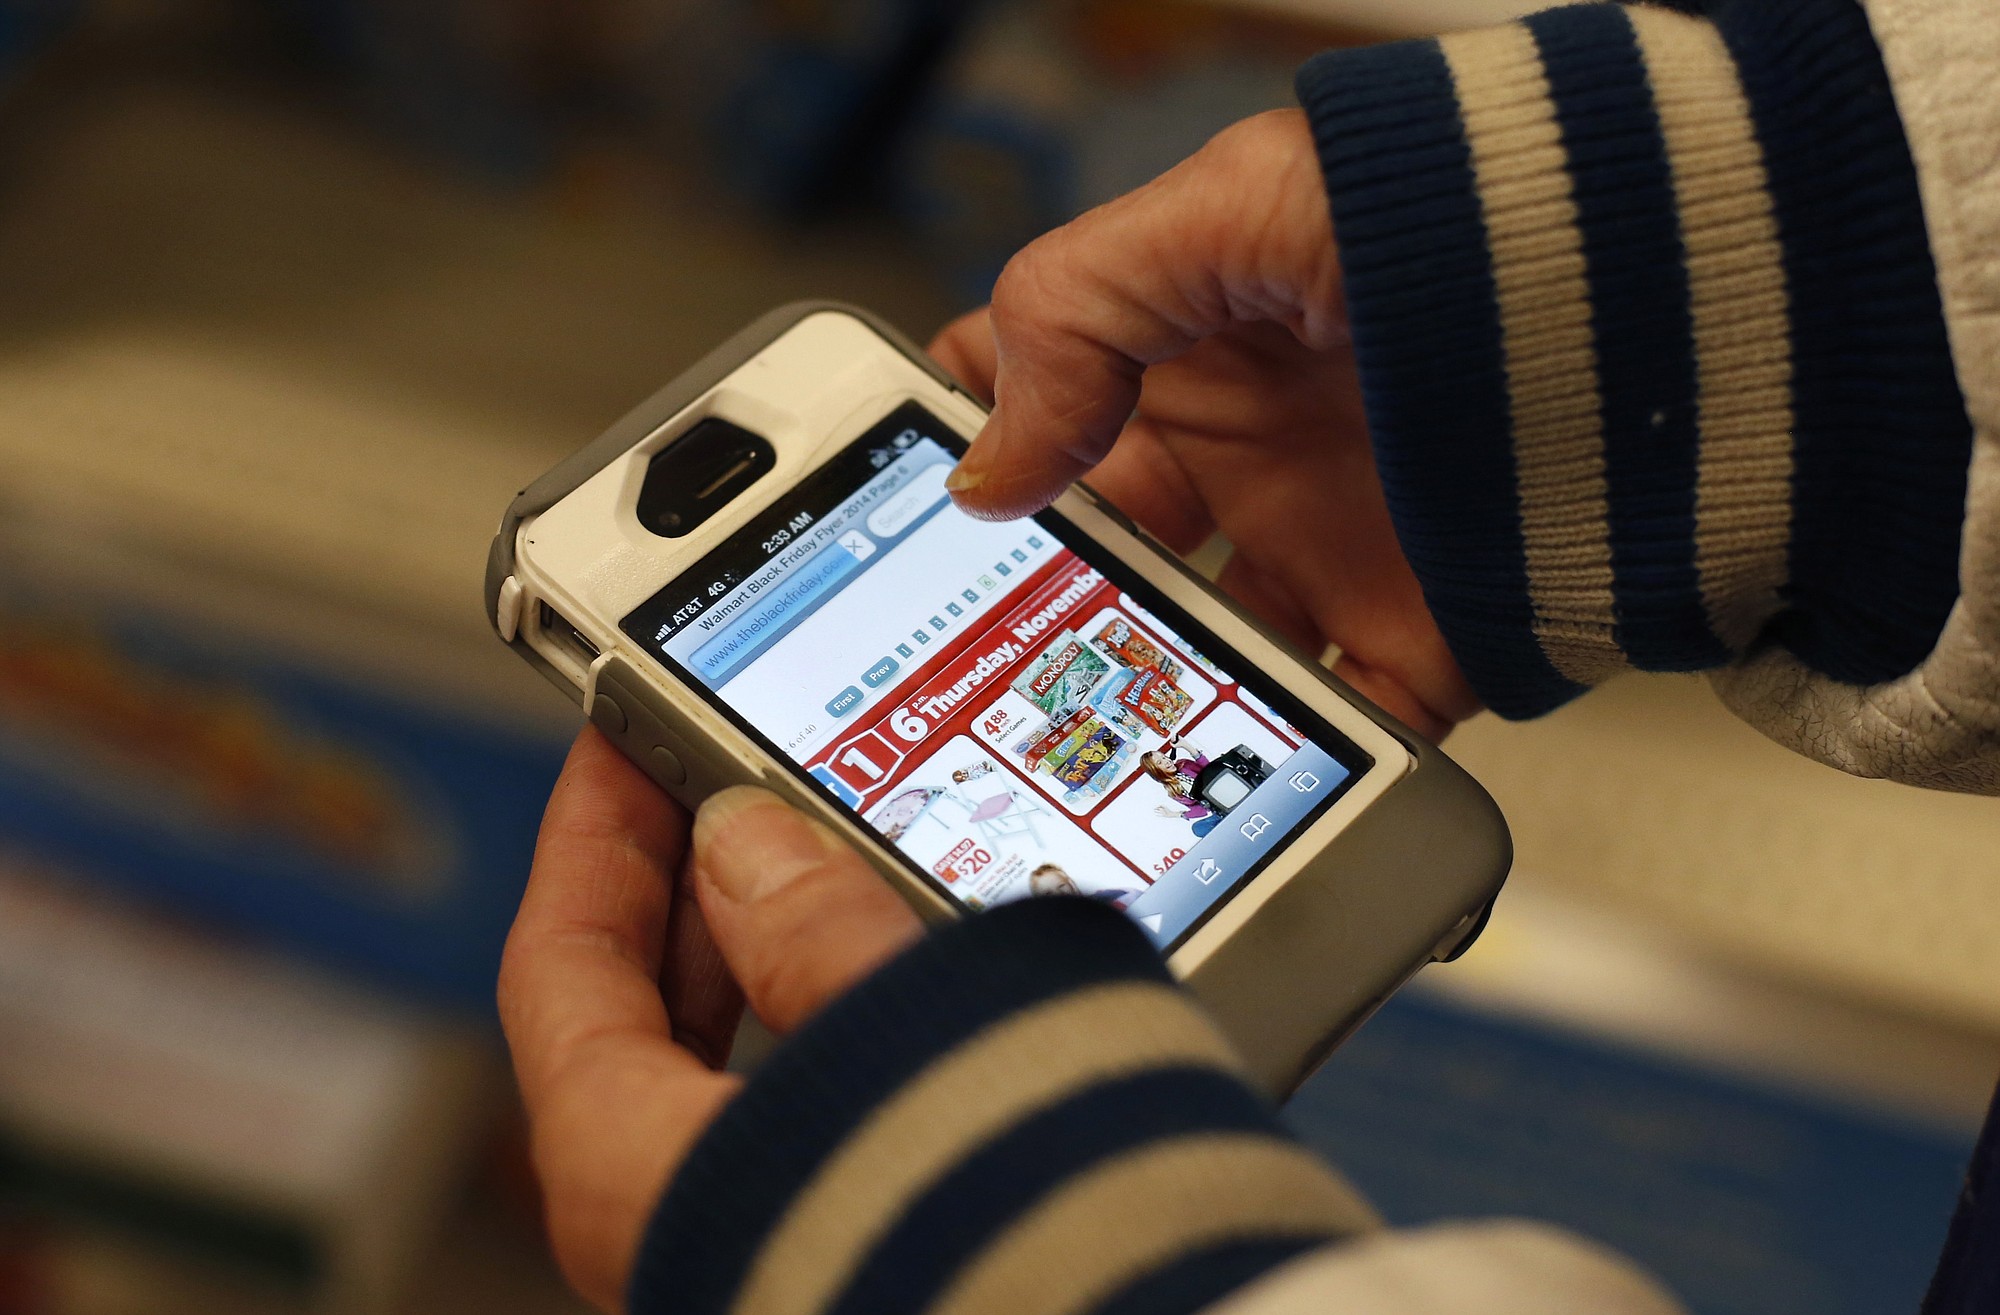 A Target shopper uses her iPhone to compare prices at Wal-Mart while shopping after midnight in South Portland, Maine.